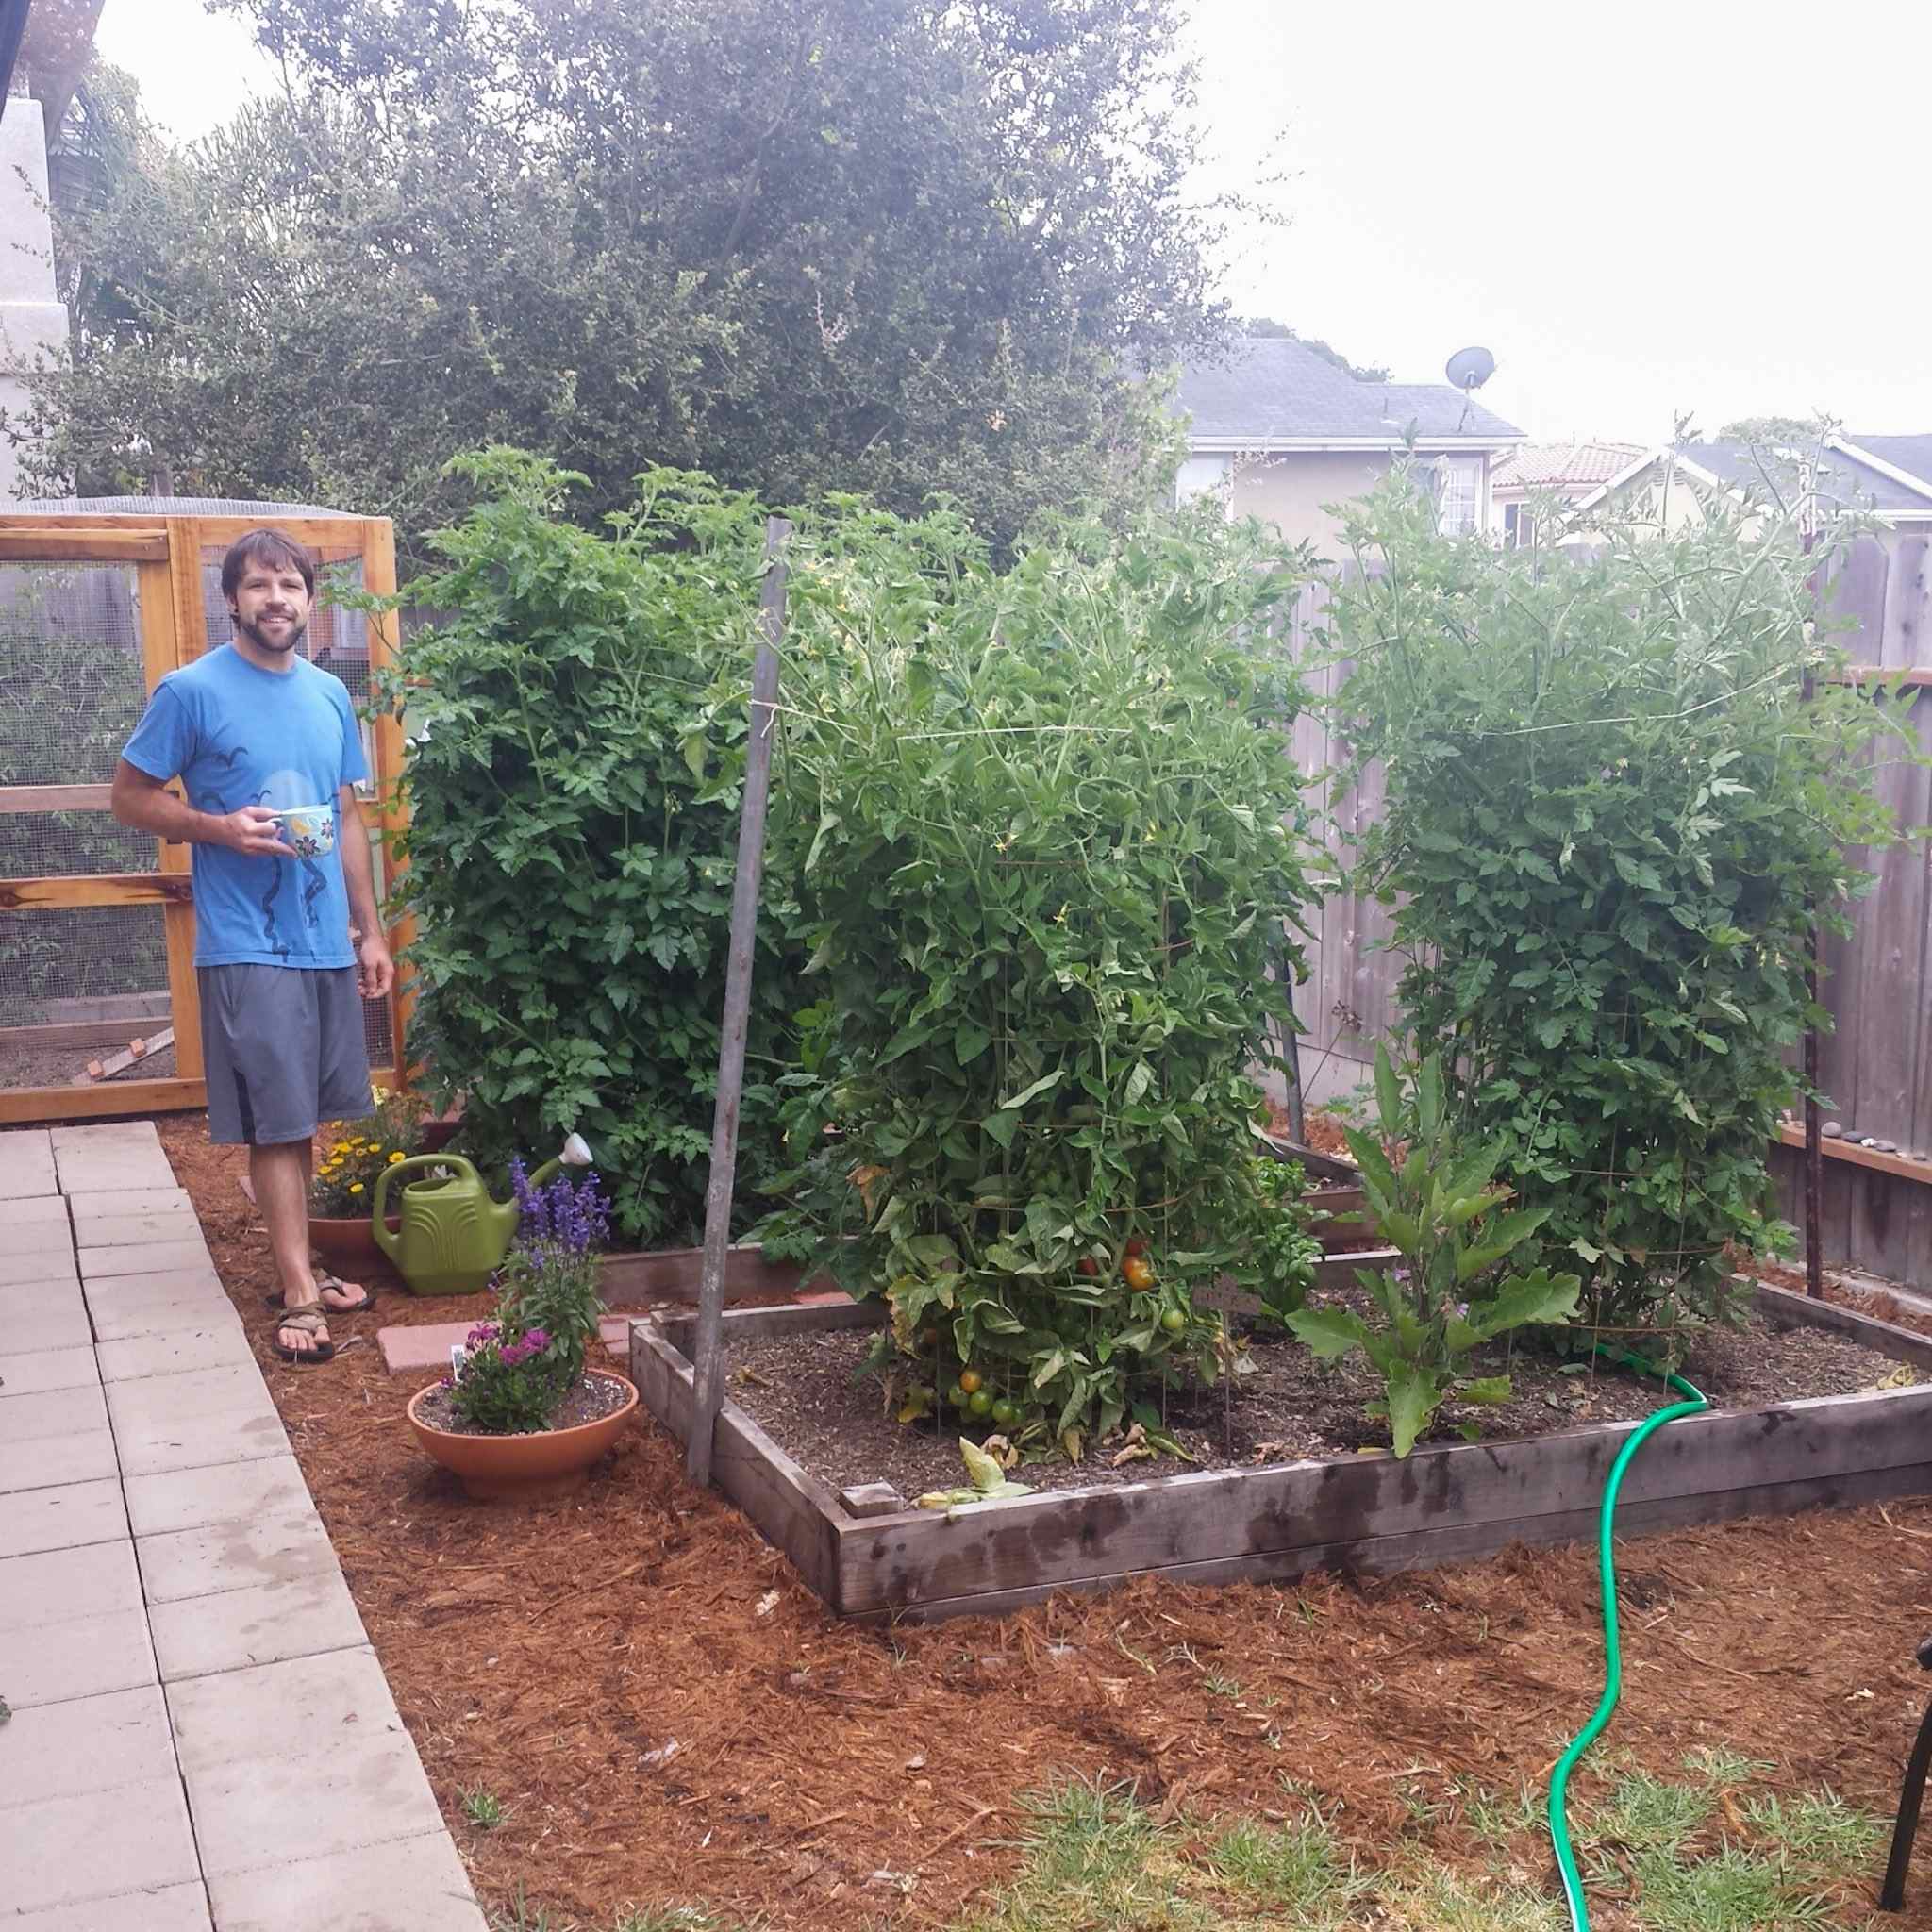 Aaron is standing amongst four mature tomato plants that are as tall as him. Some of the tomato plants are baring visibly ripe fruit while the others won't be far behind.